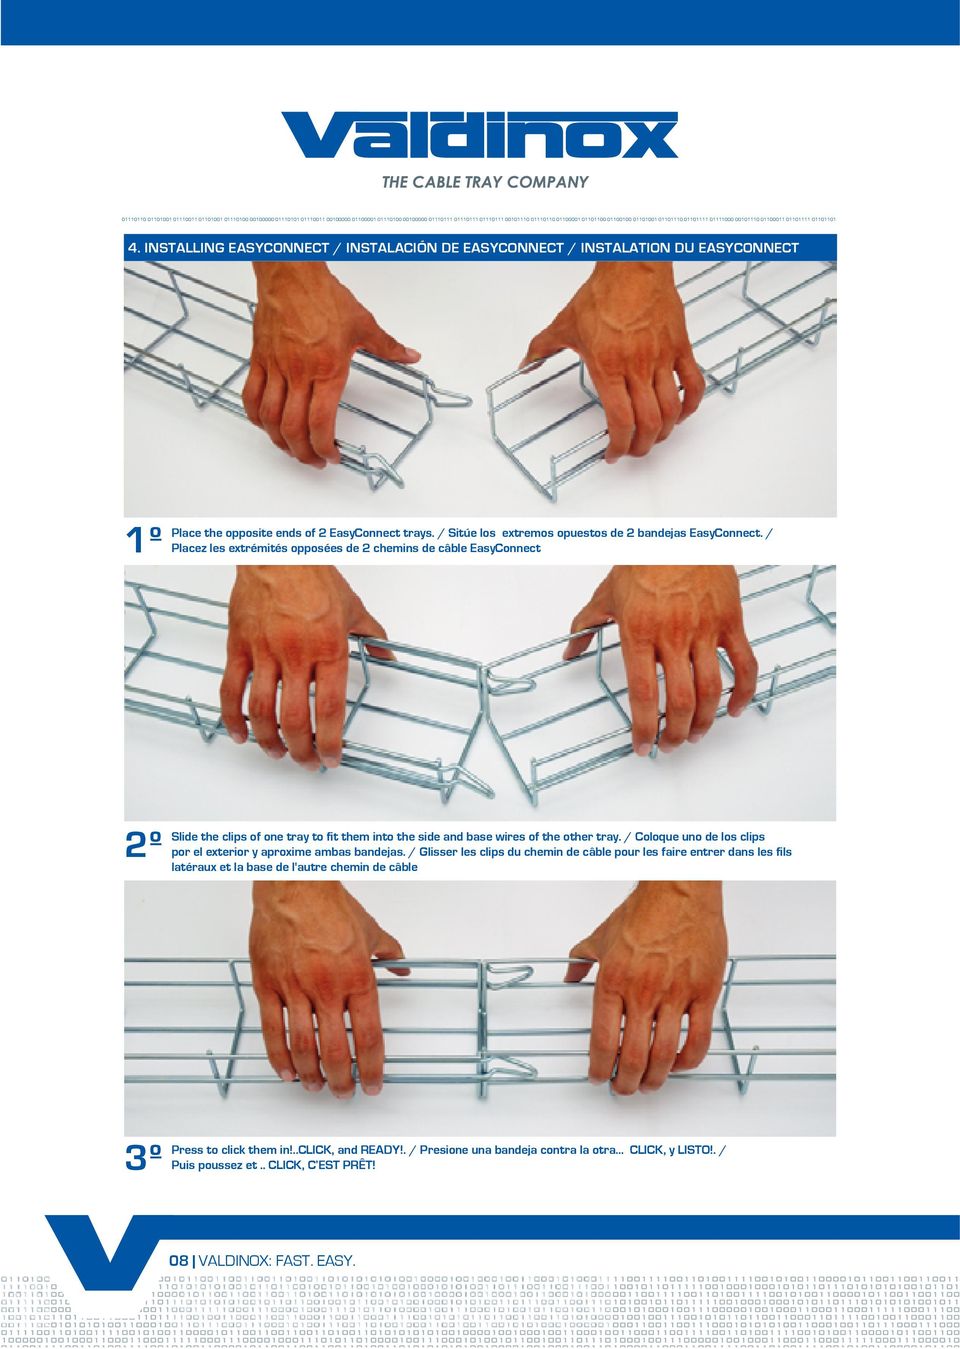 / Placez les extrémités opposées de 2 chemins de câble EasyConnect 2º Slide the clips of one tray to fit them into the side and base wires of the other tray.